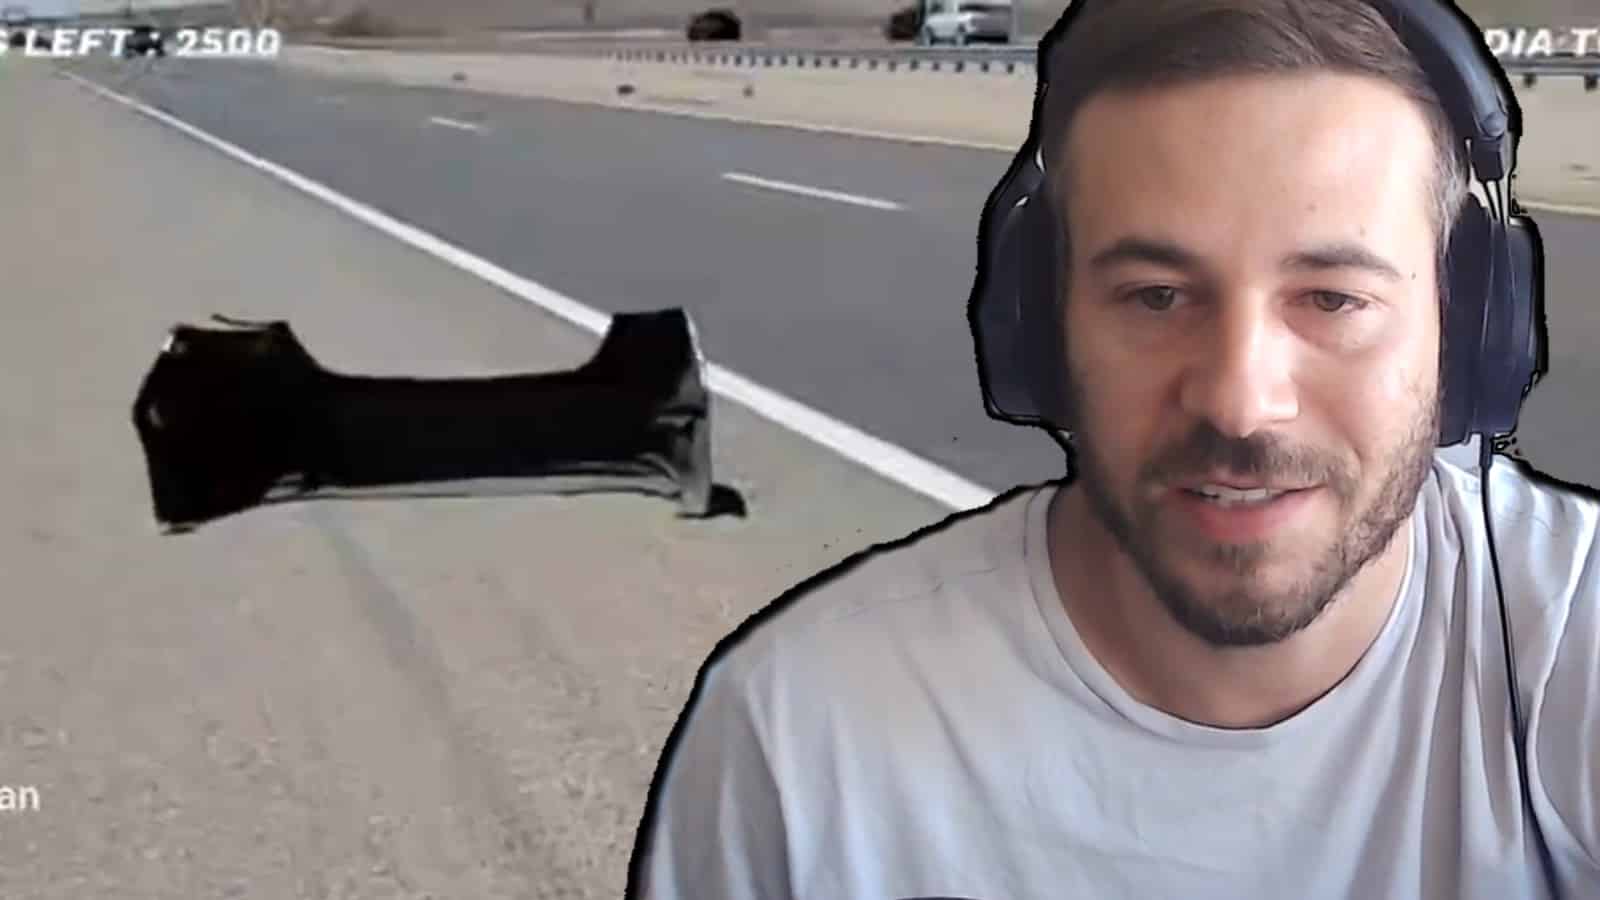 Garytheproducer streaming in front of screenshot of his car bumper on the road